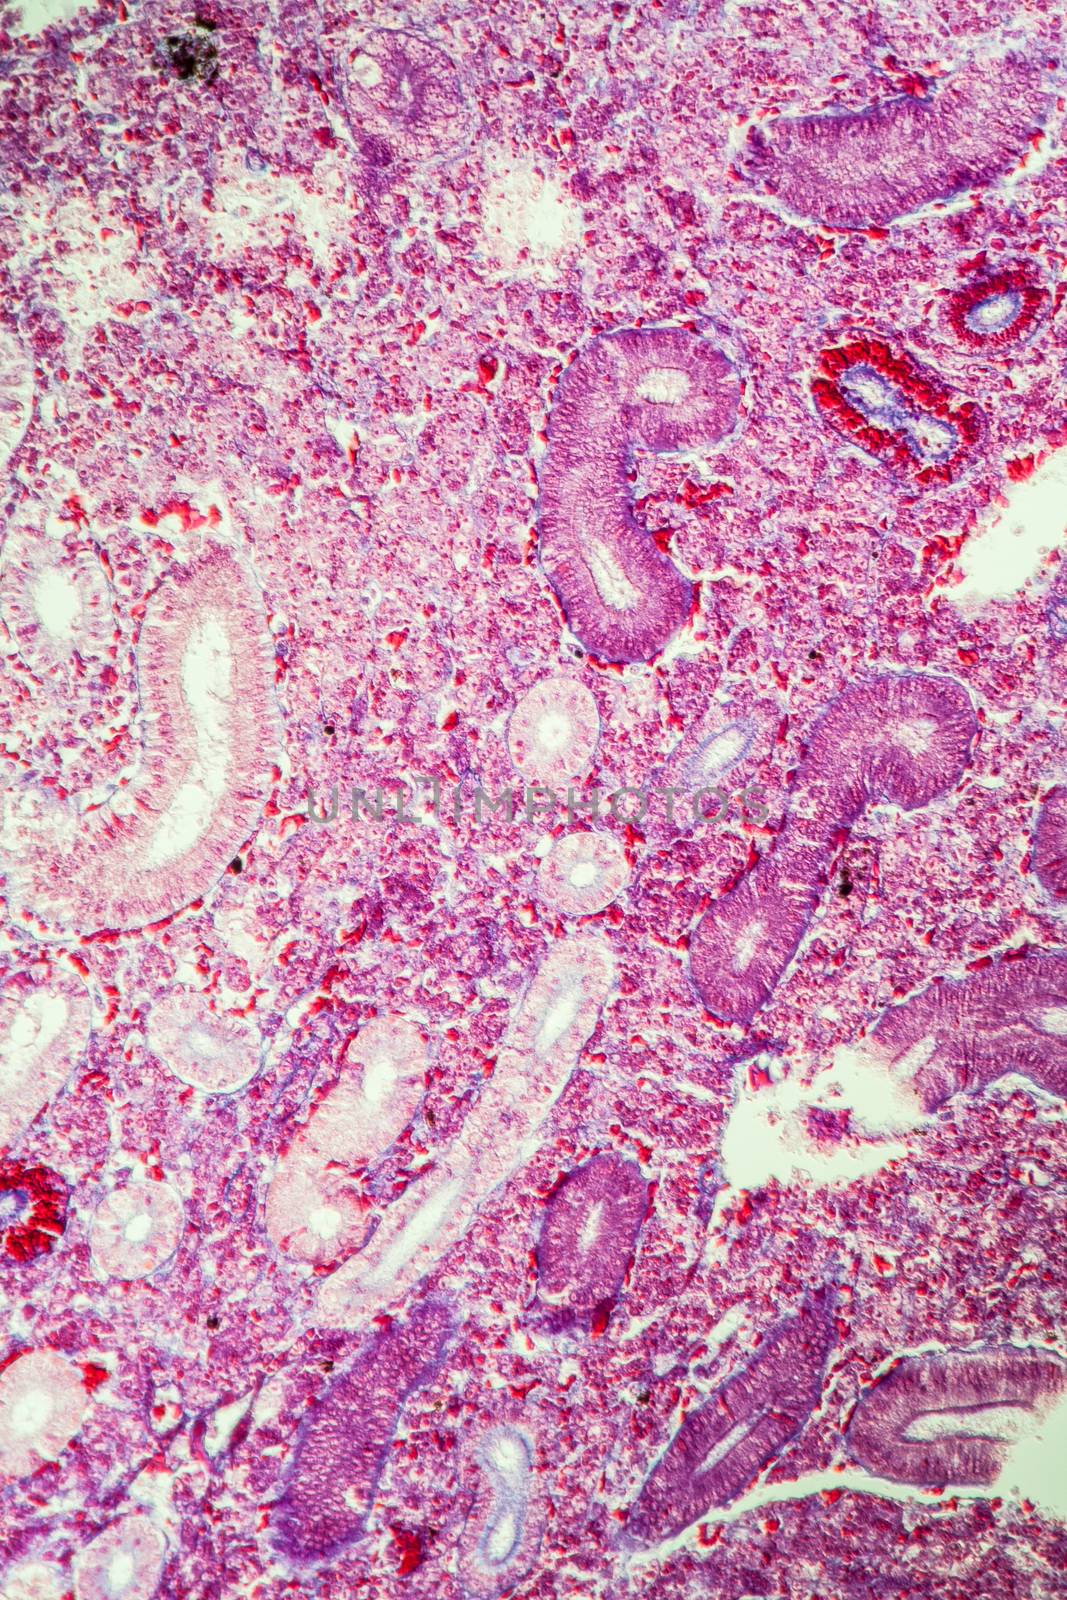 Pike kidney in cross section 100x by Dr-Lange